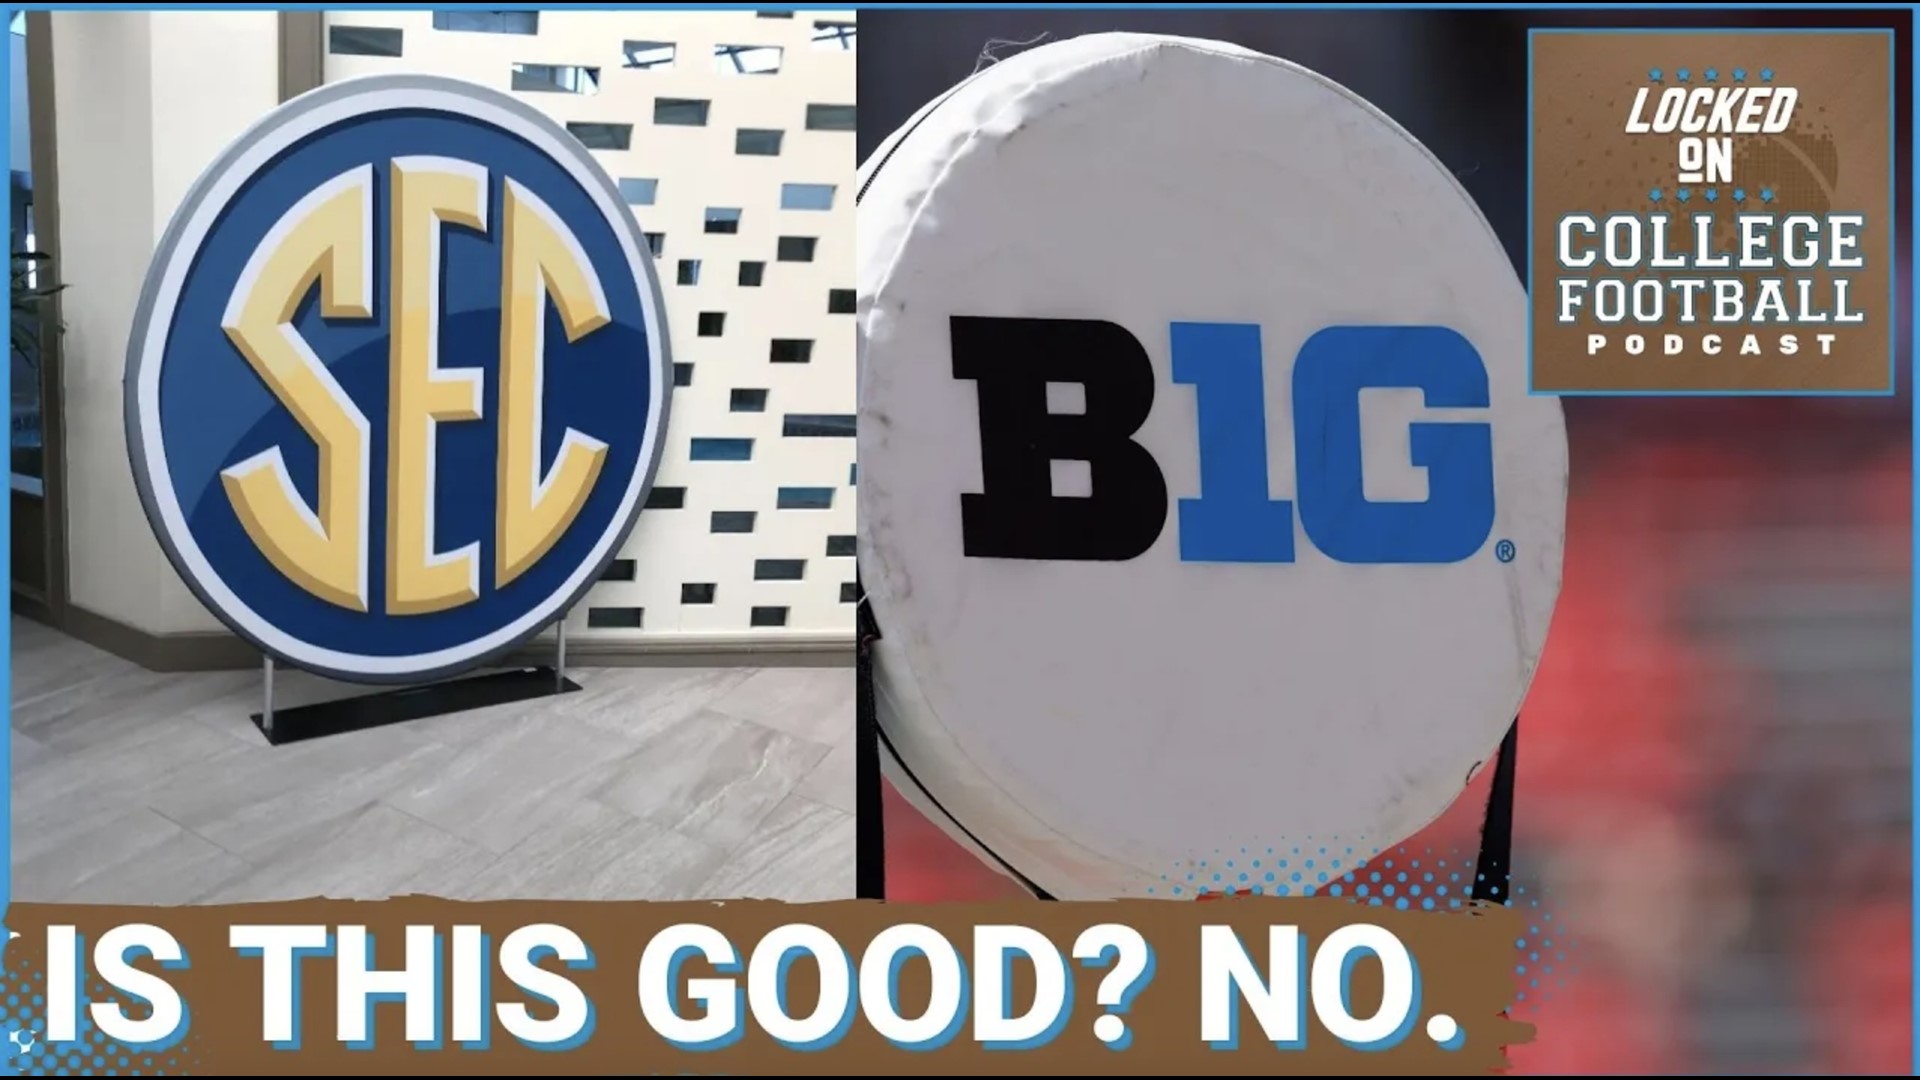 The SEC and the Big 10 started with an investigative joint committee to explore how to "fix" several big issues in College Football.